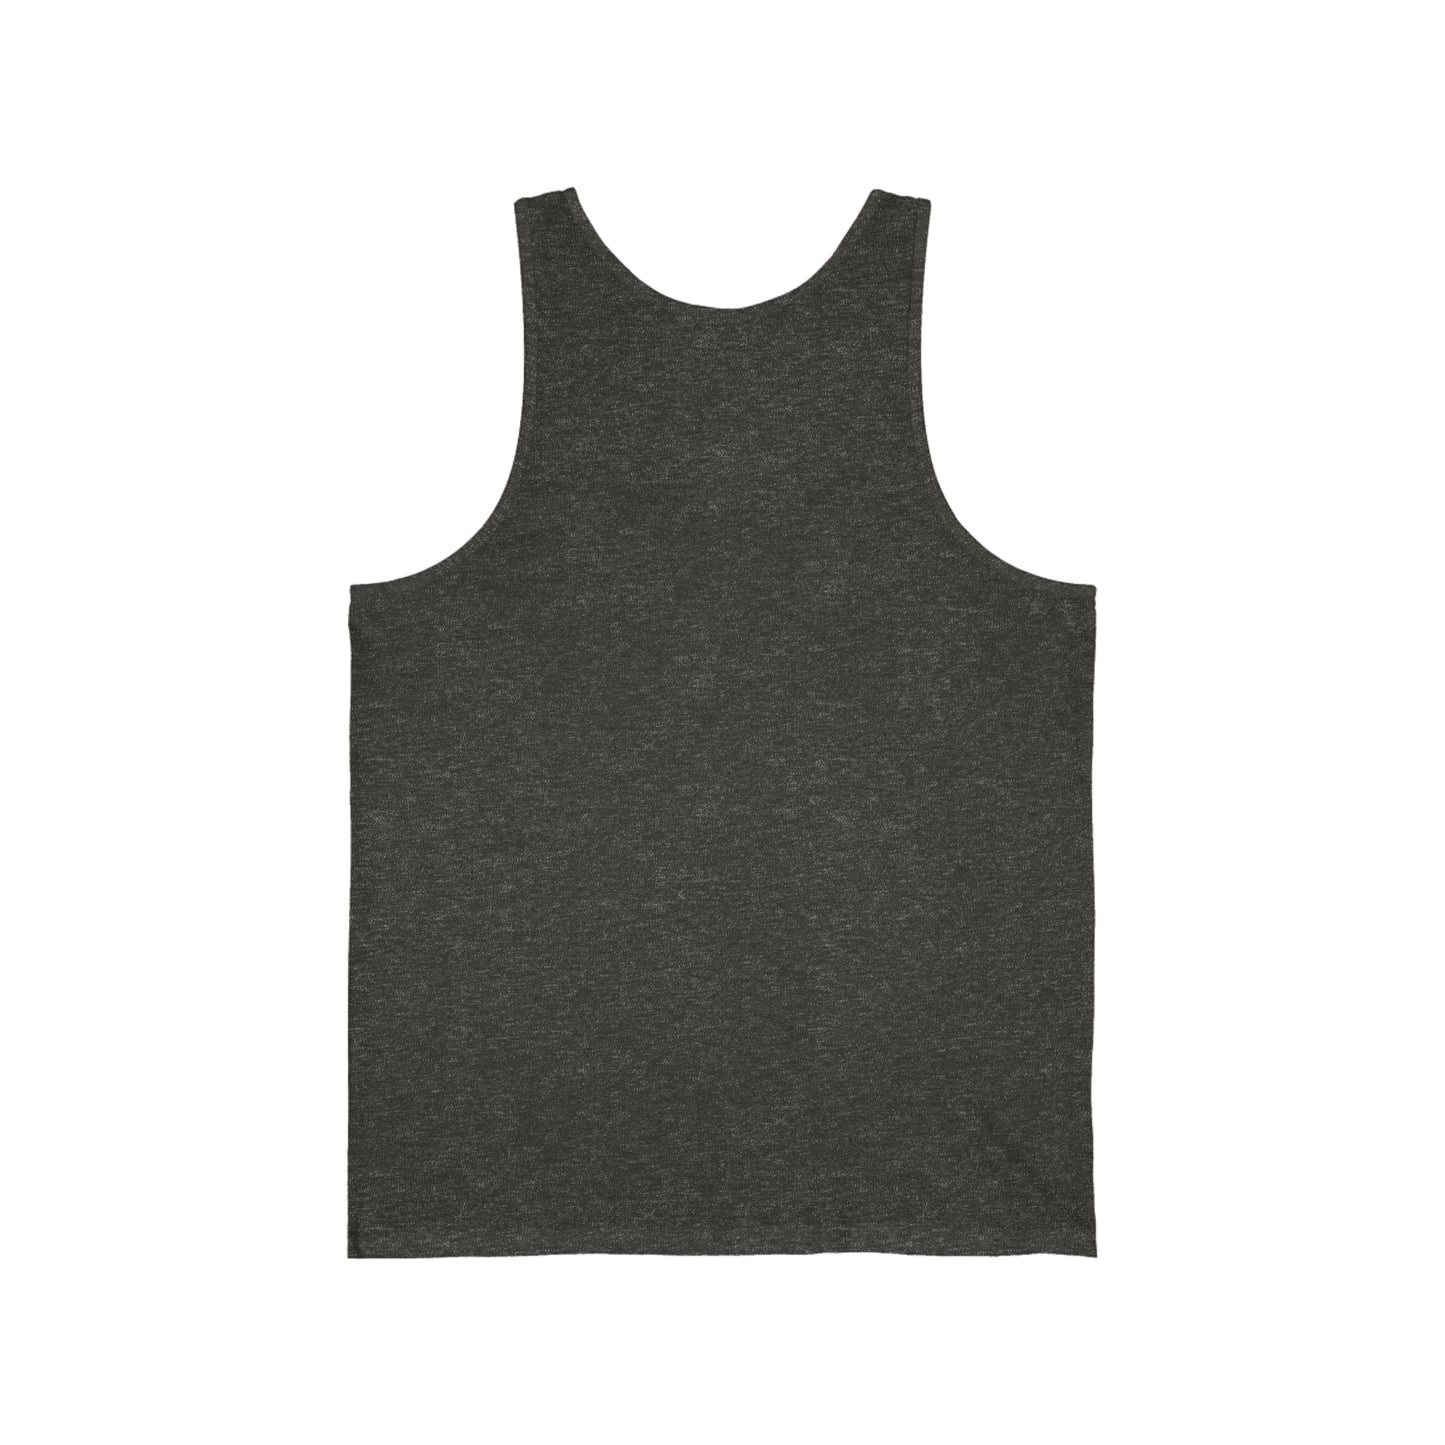 Did Someone Say Cat? Unisex Jersey Tank